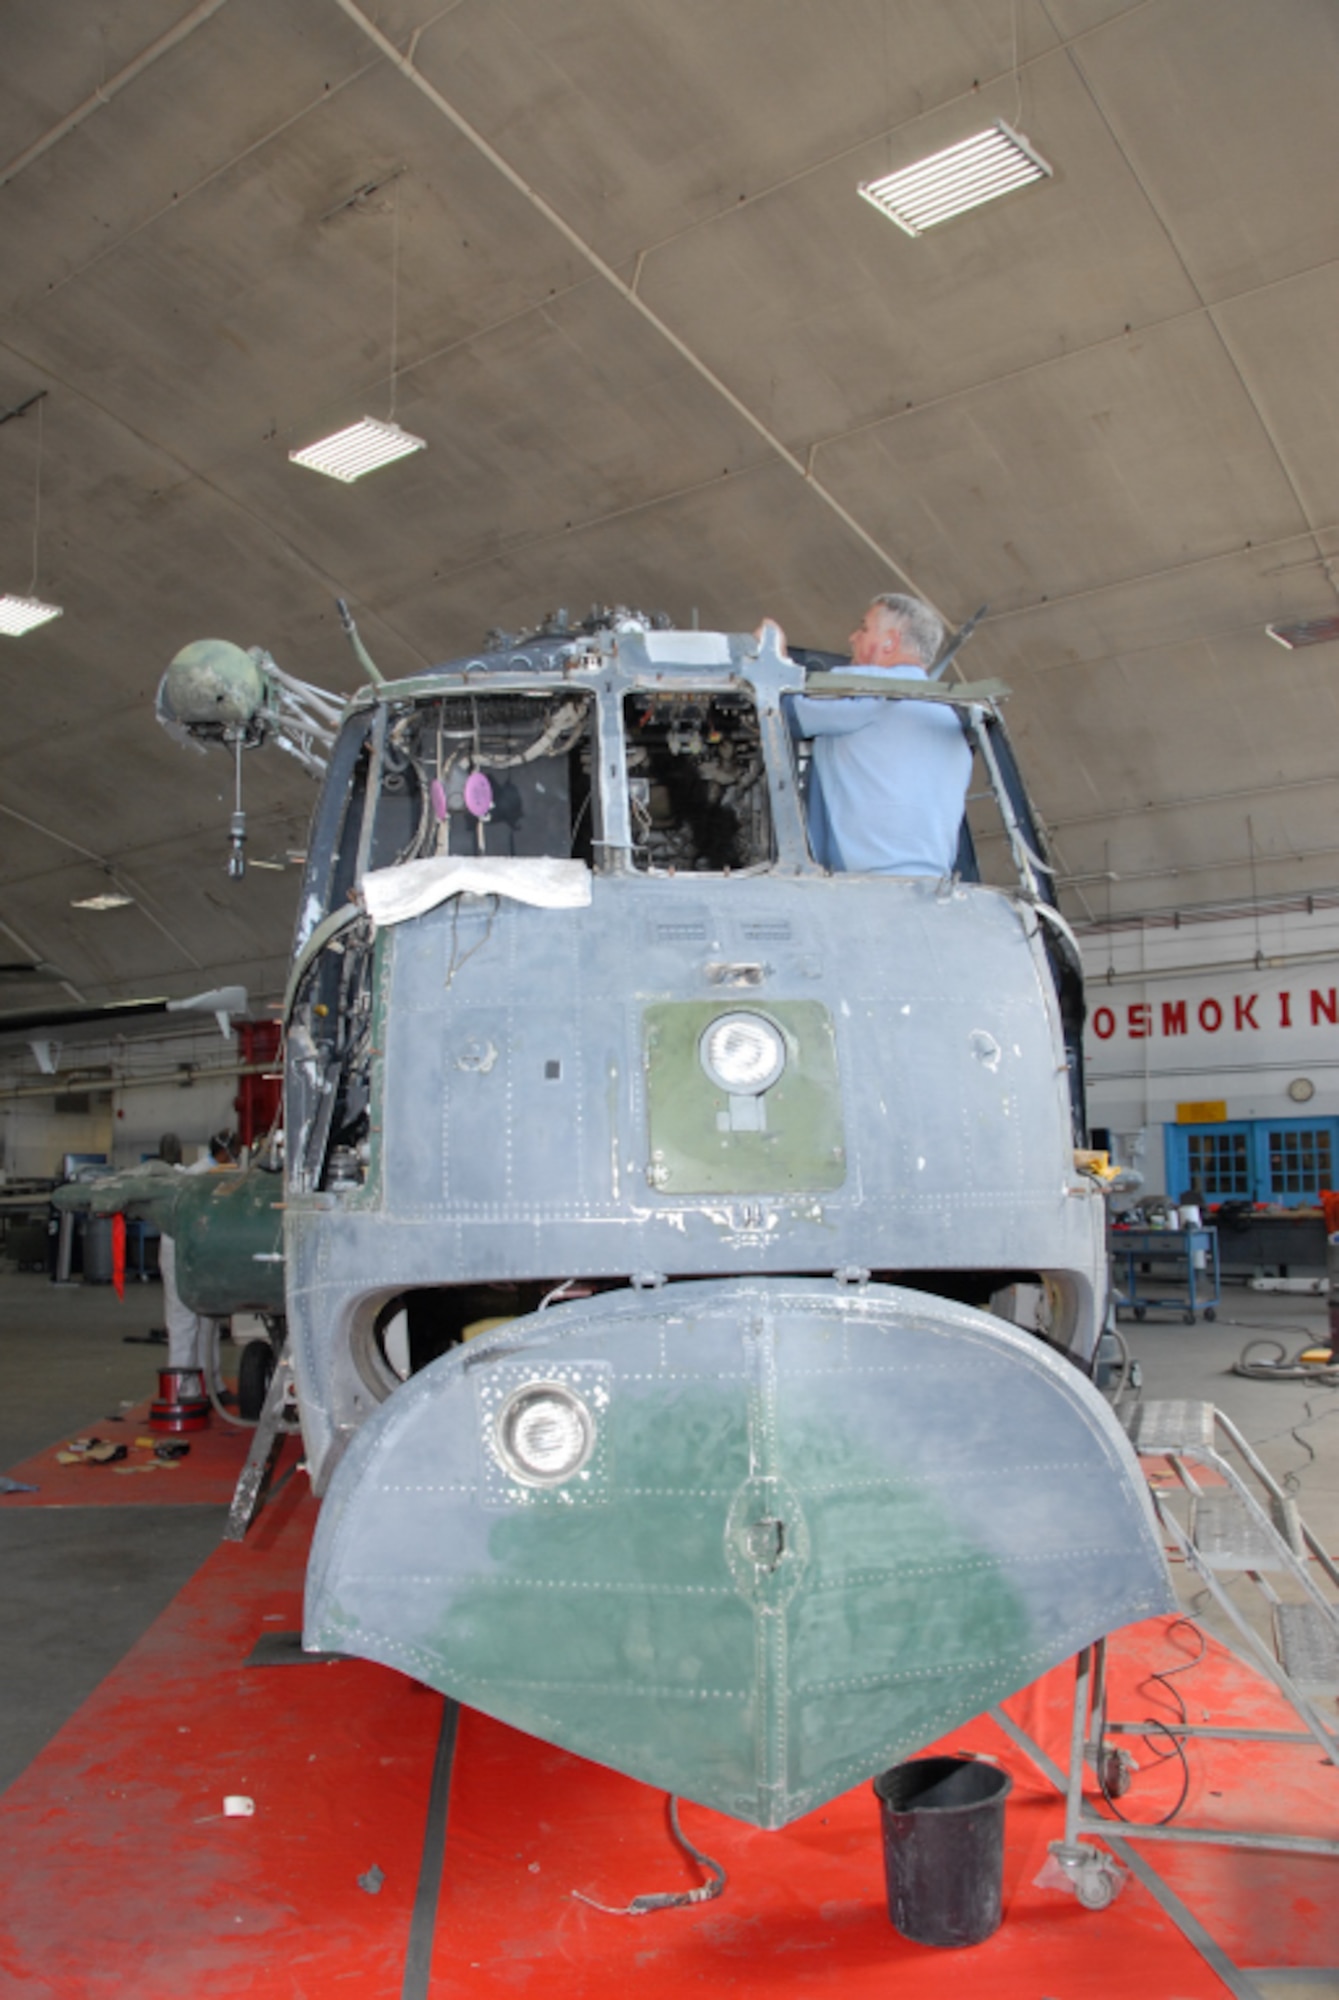 DAYTON, Ohio - Historic HH-3 "Jolly Green" undergoing restoration work at the National Museum of the U.S. Air Force. (U.S. Air Force Photo)